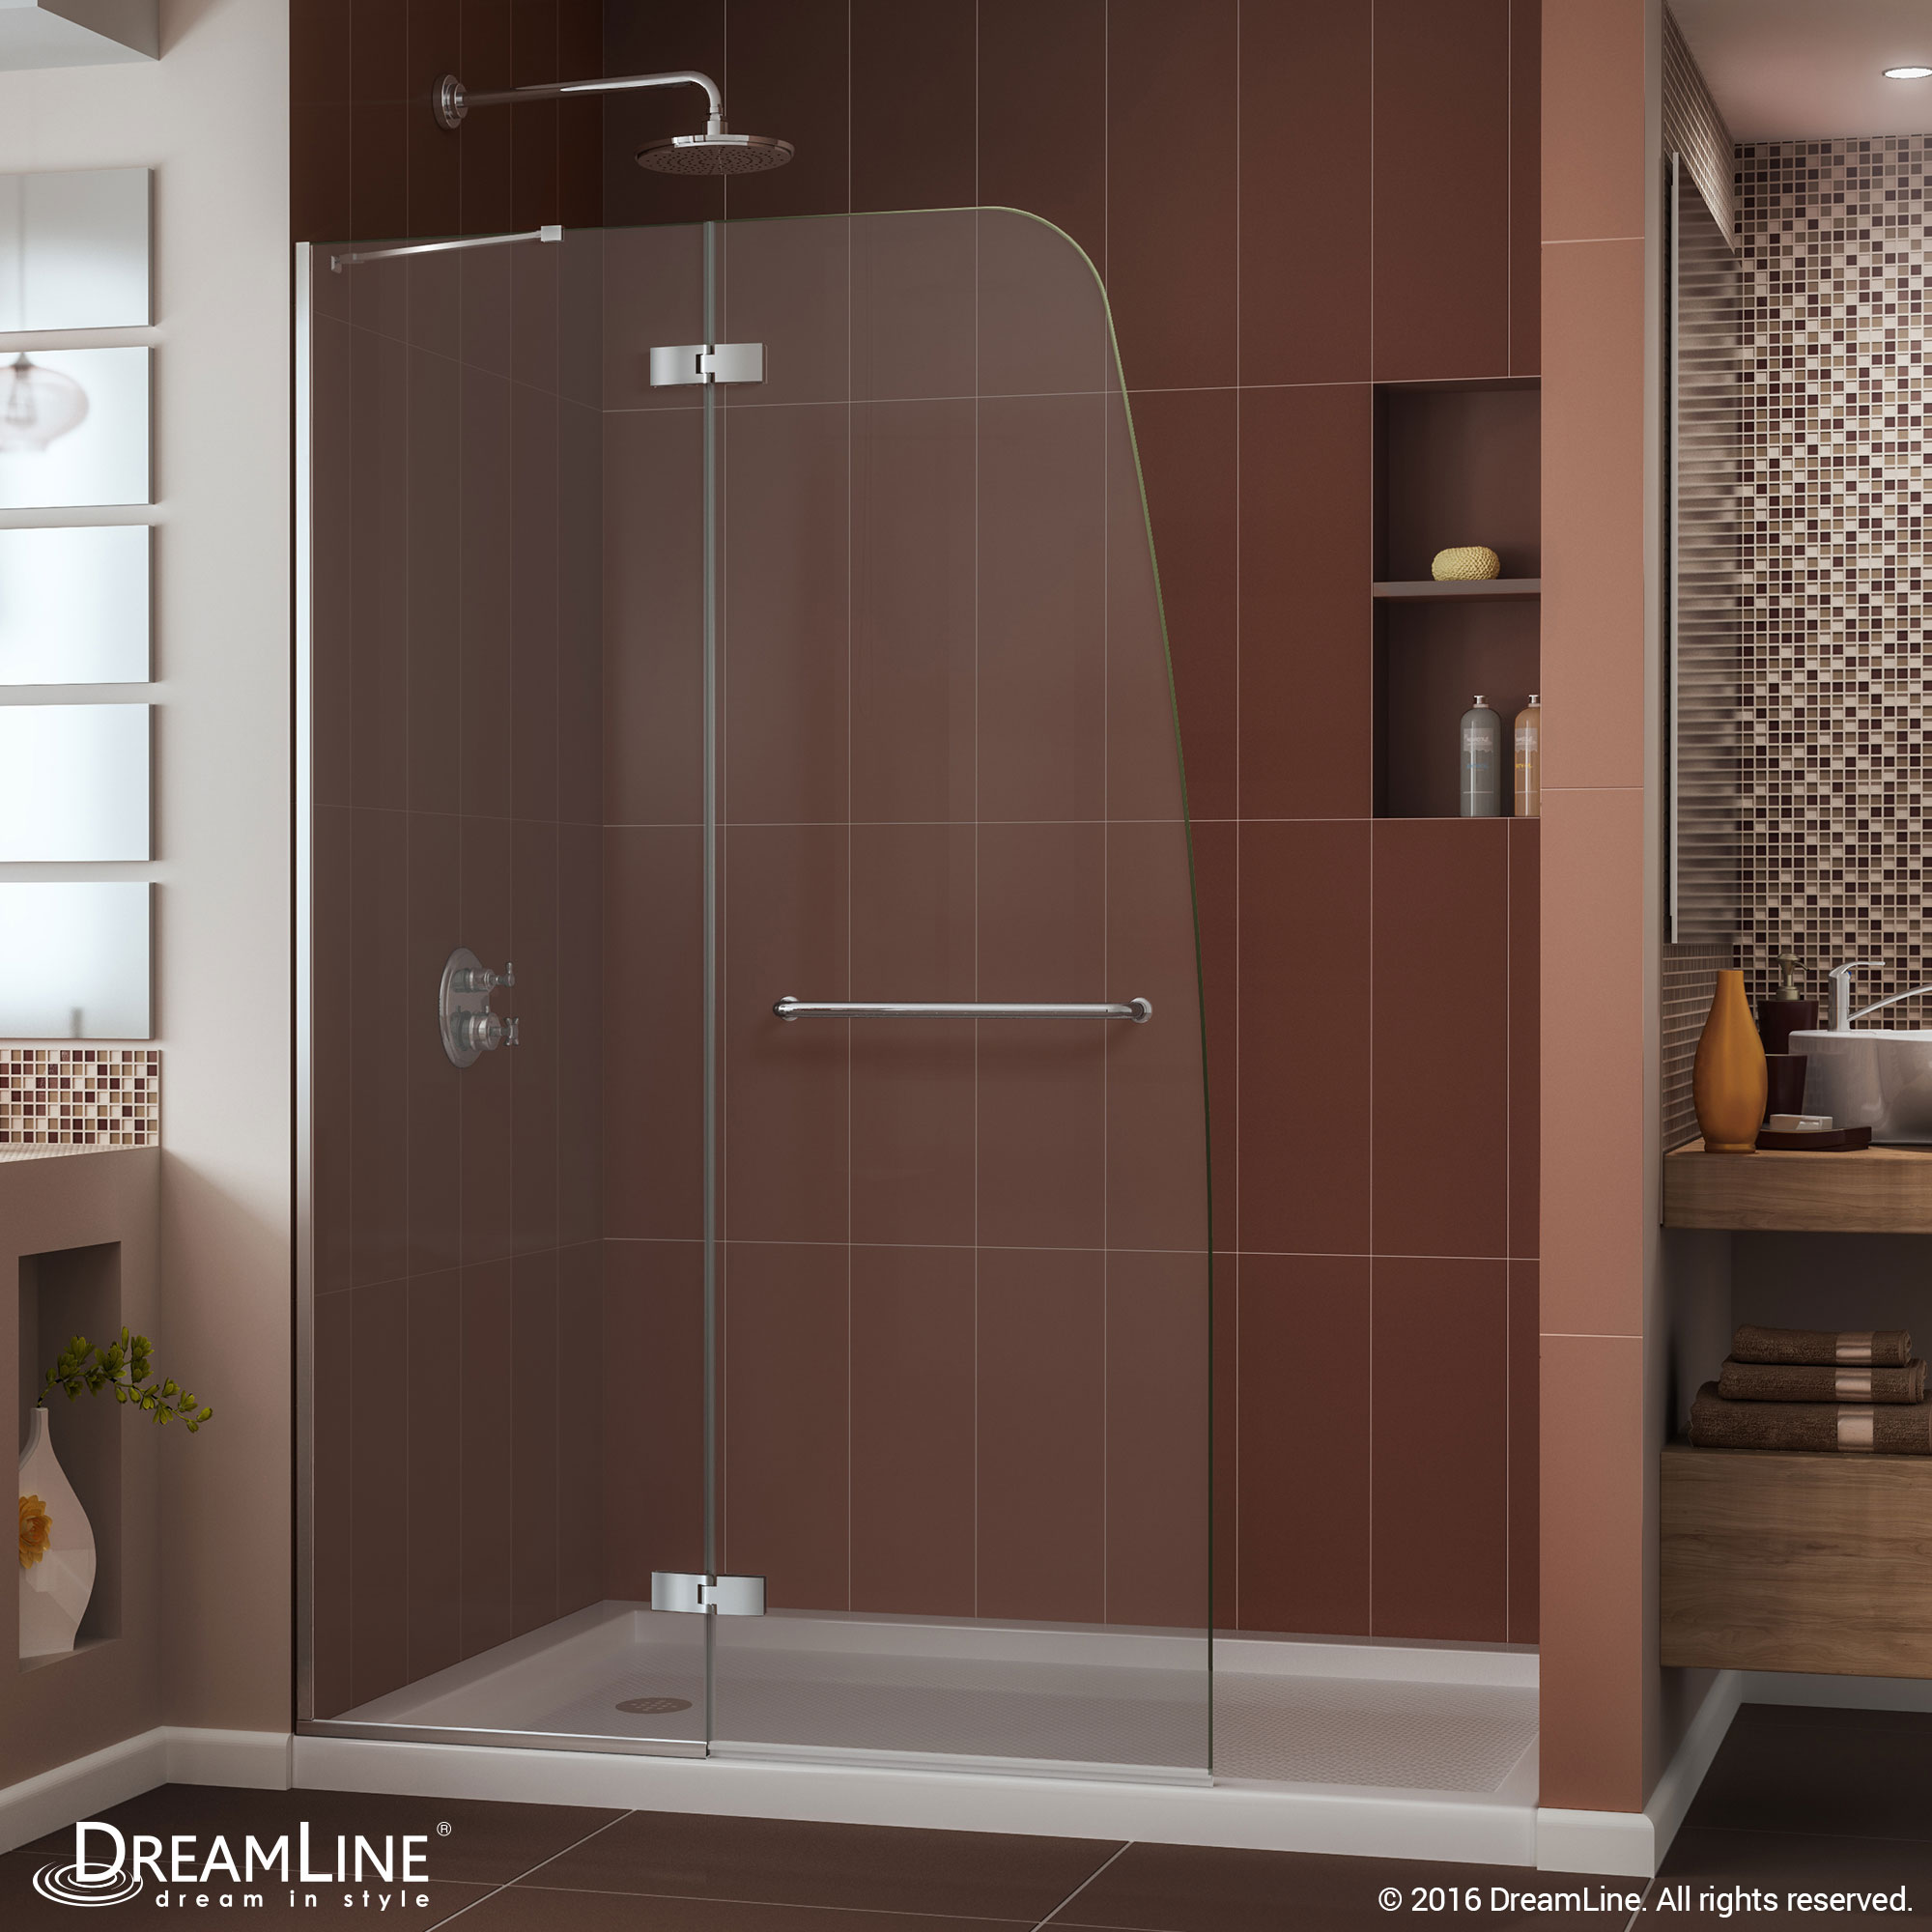 DreamLine Aqua Ultra 32 in. D x 60 in. W x 74 3/4 in. H Frameless Shower Door in Chrome and Right Drain Biscuit Base Kit